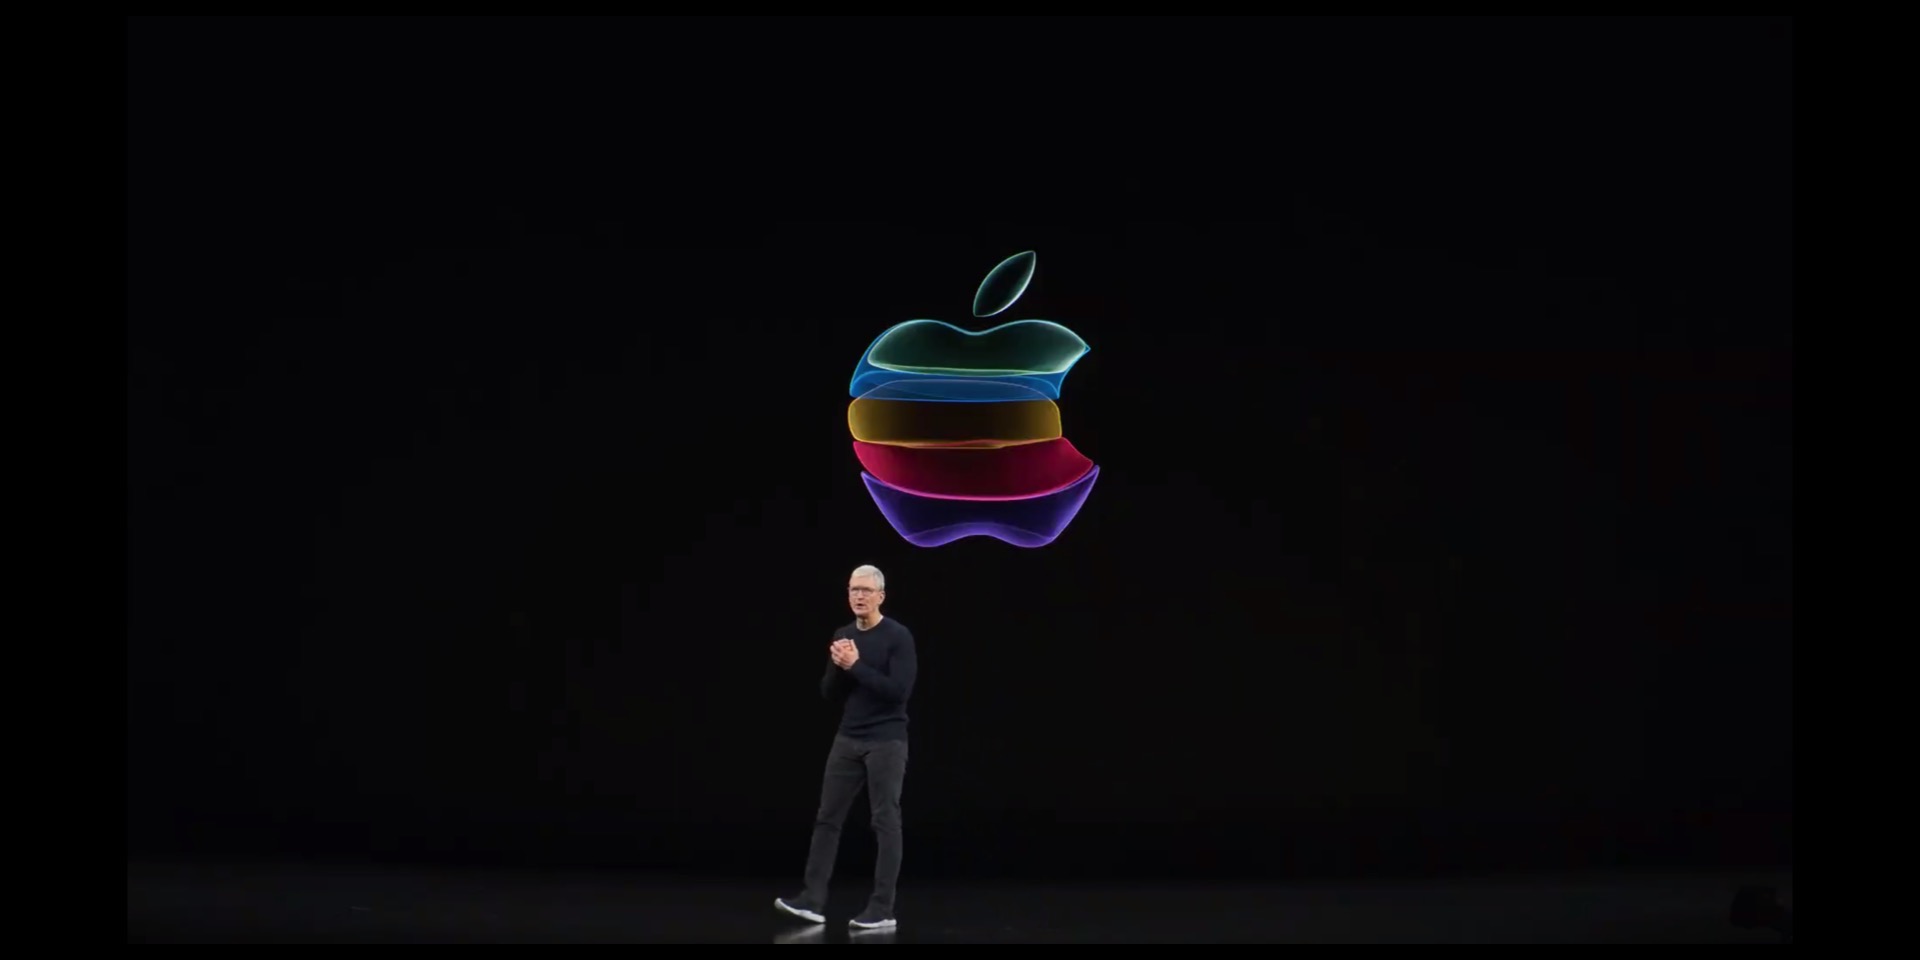 Watch the full iPhone event keynote, supercut, and more on YouTube and Apple․com  - 9to5Mac